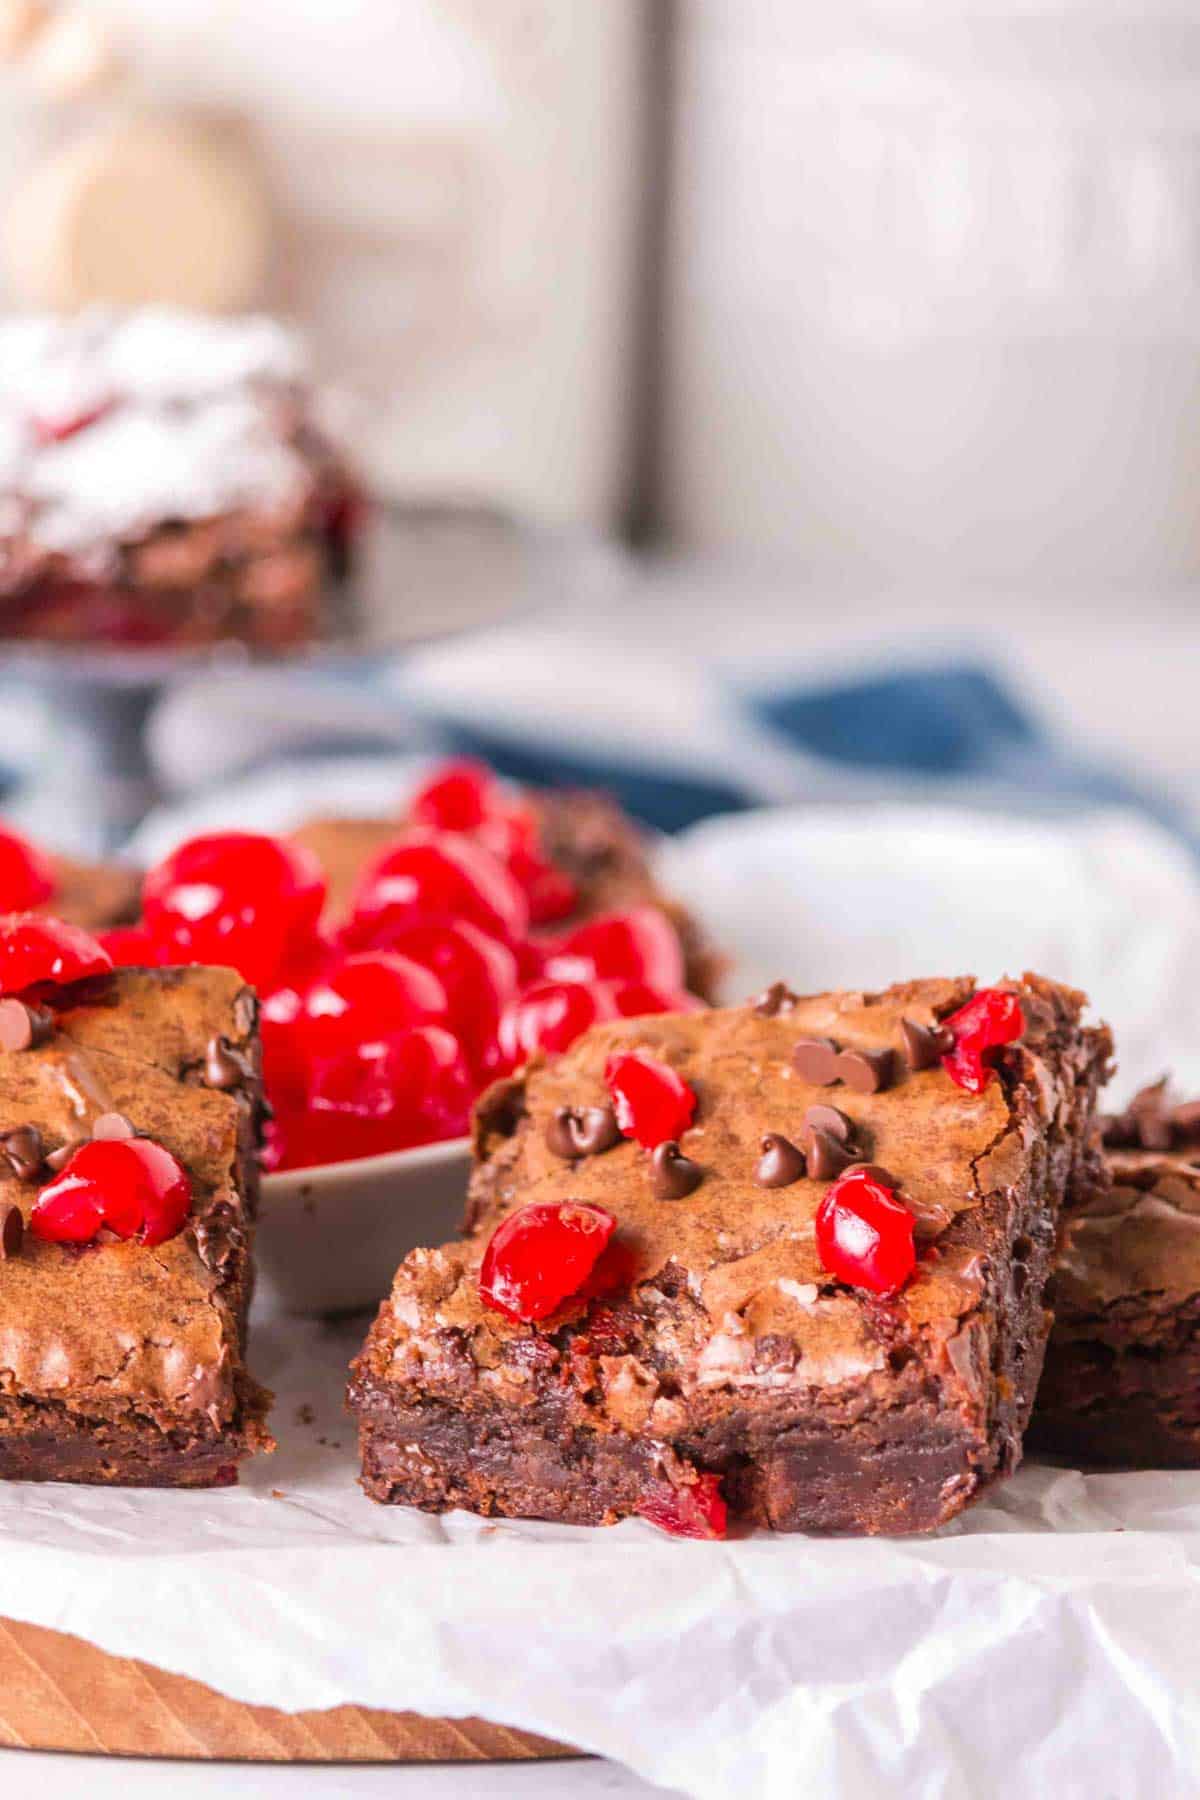 Maraschino Cherry Brownies are decadent chocolate brownies made with boxed brownie mix, chocolate chips, maraschino cherries and instant coffee.